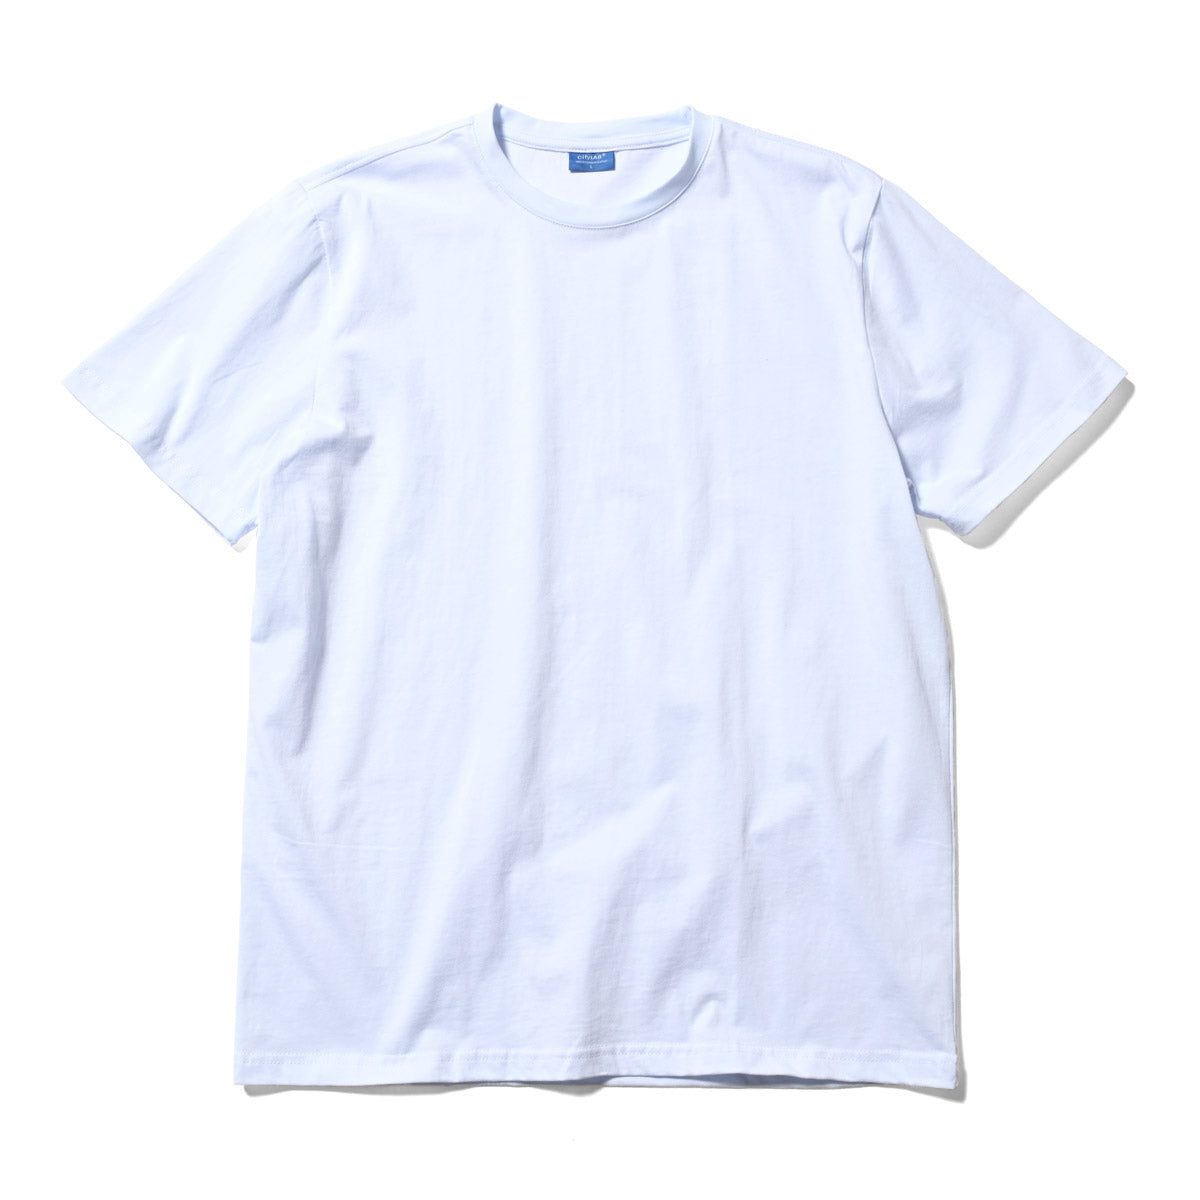 CITYLAB 0208R Fitted T-Shirt Crew Neck